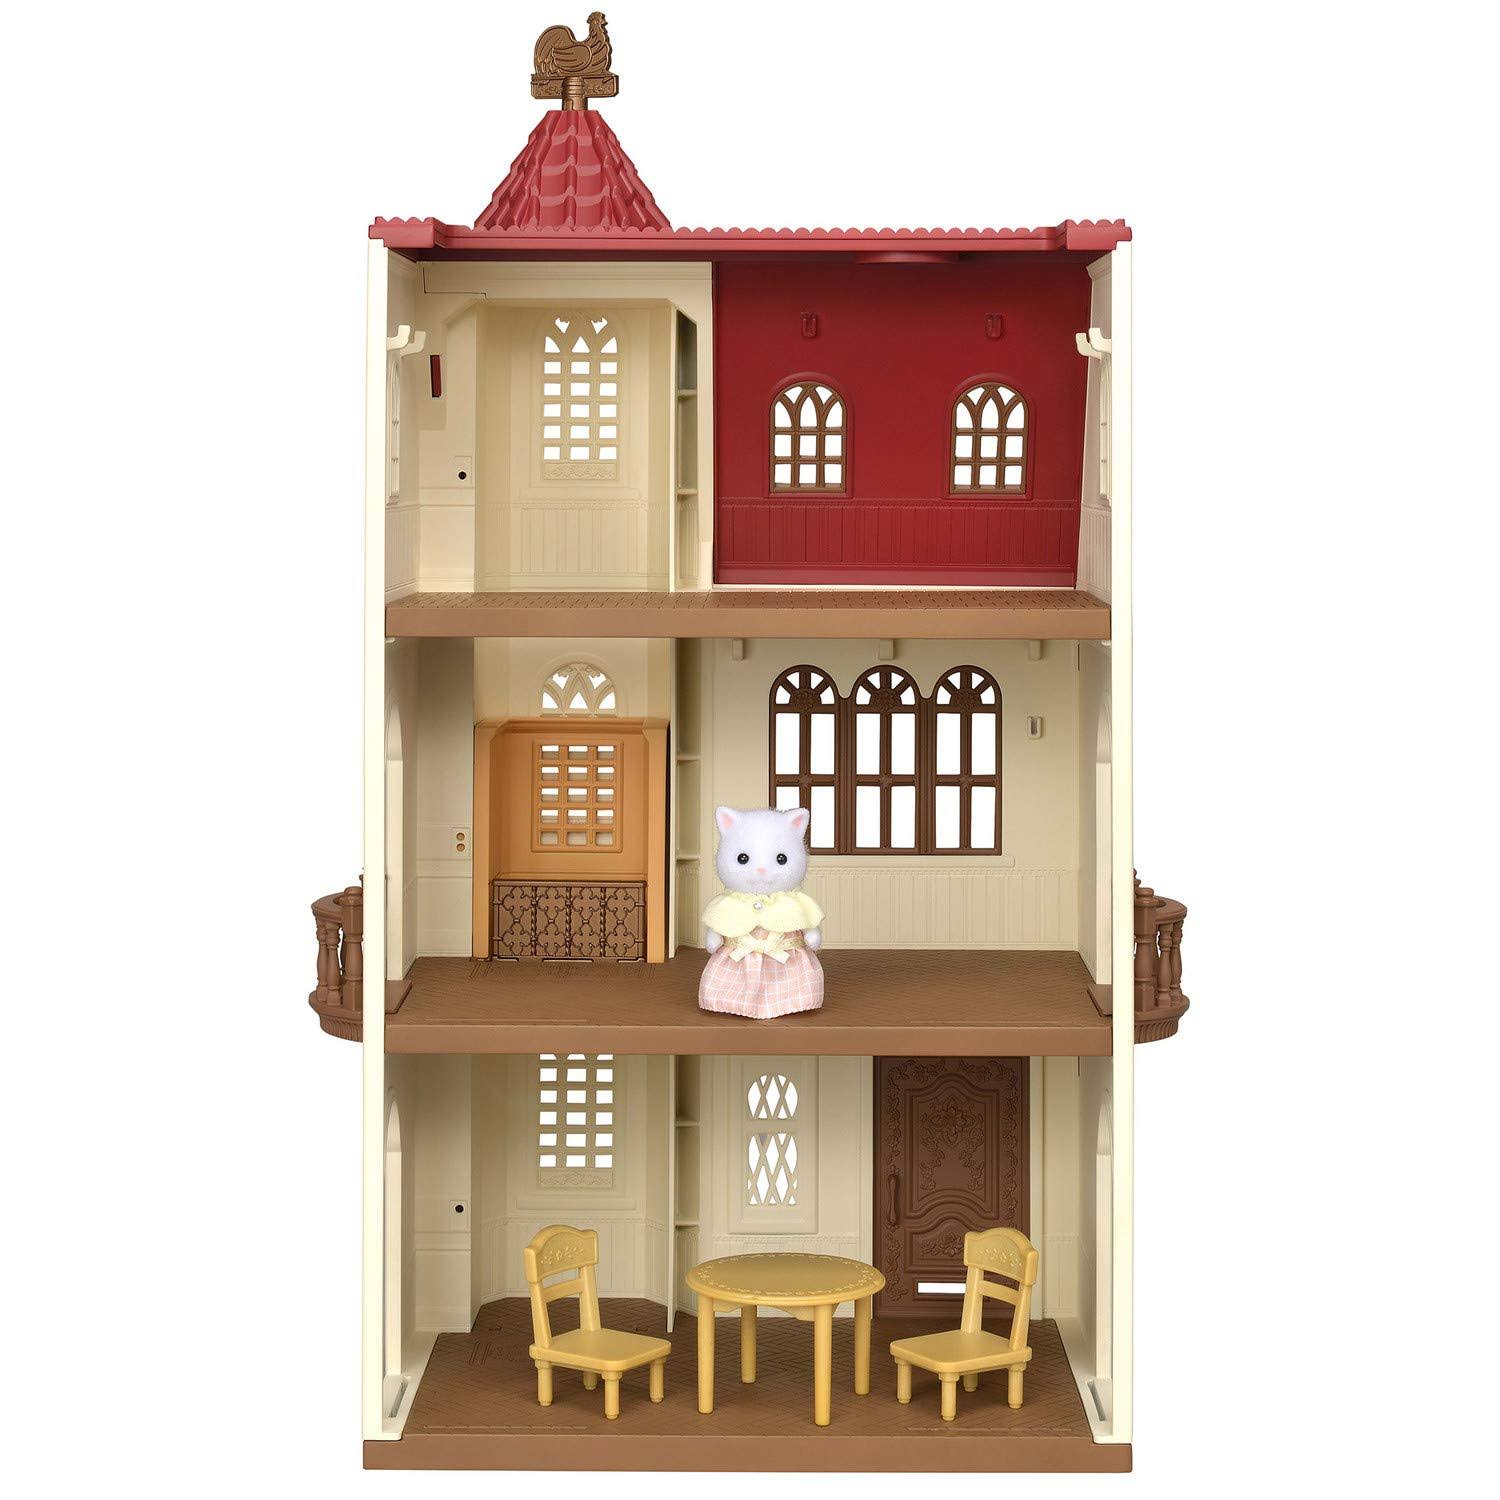 Calico Critters Red Roof Tower Home